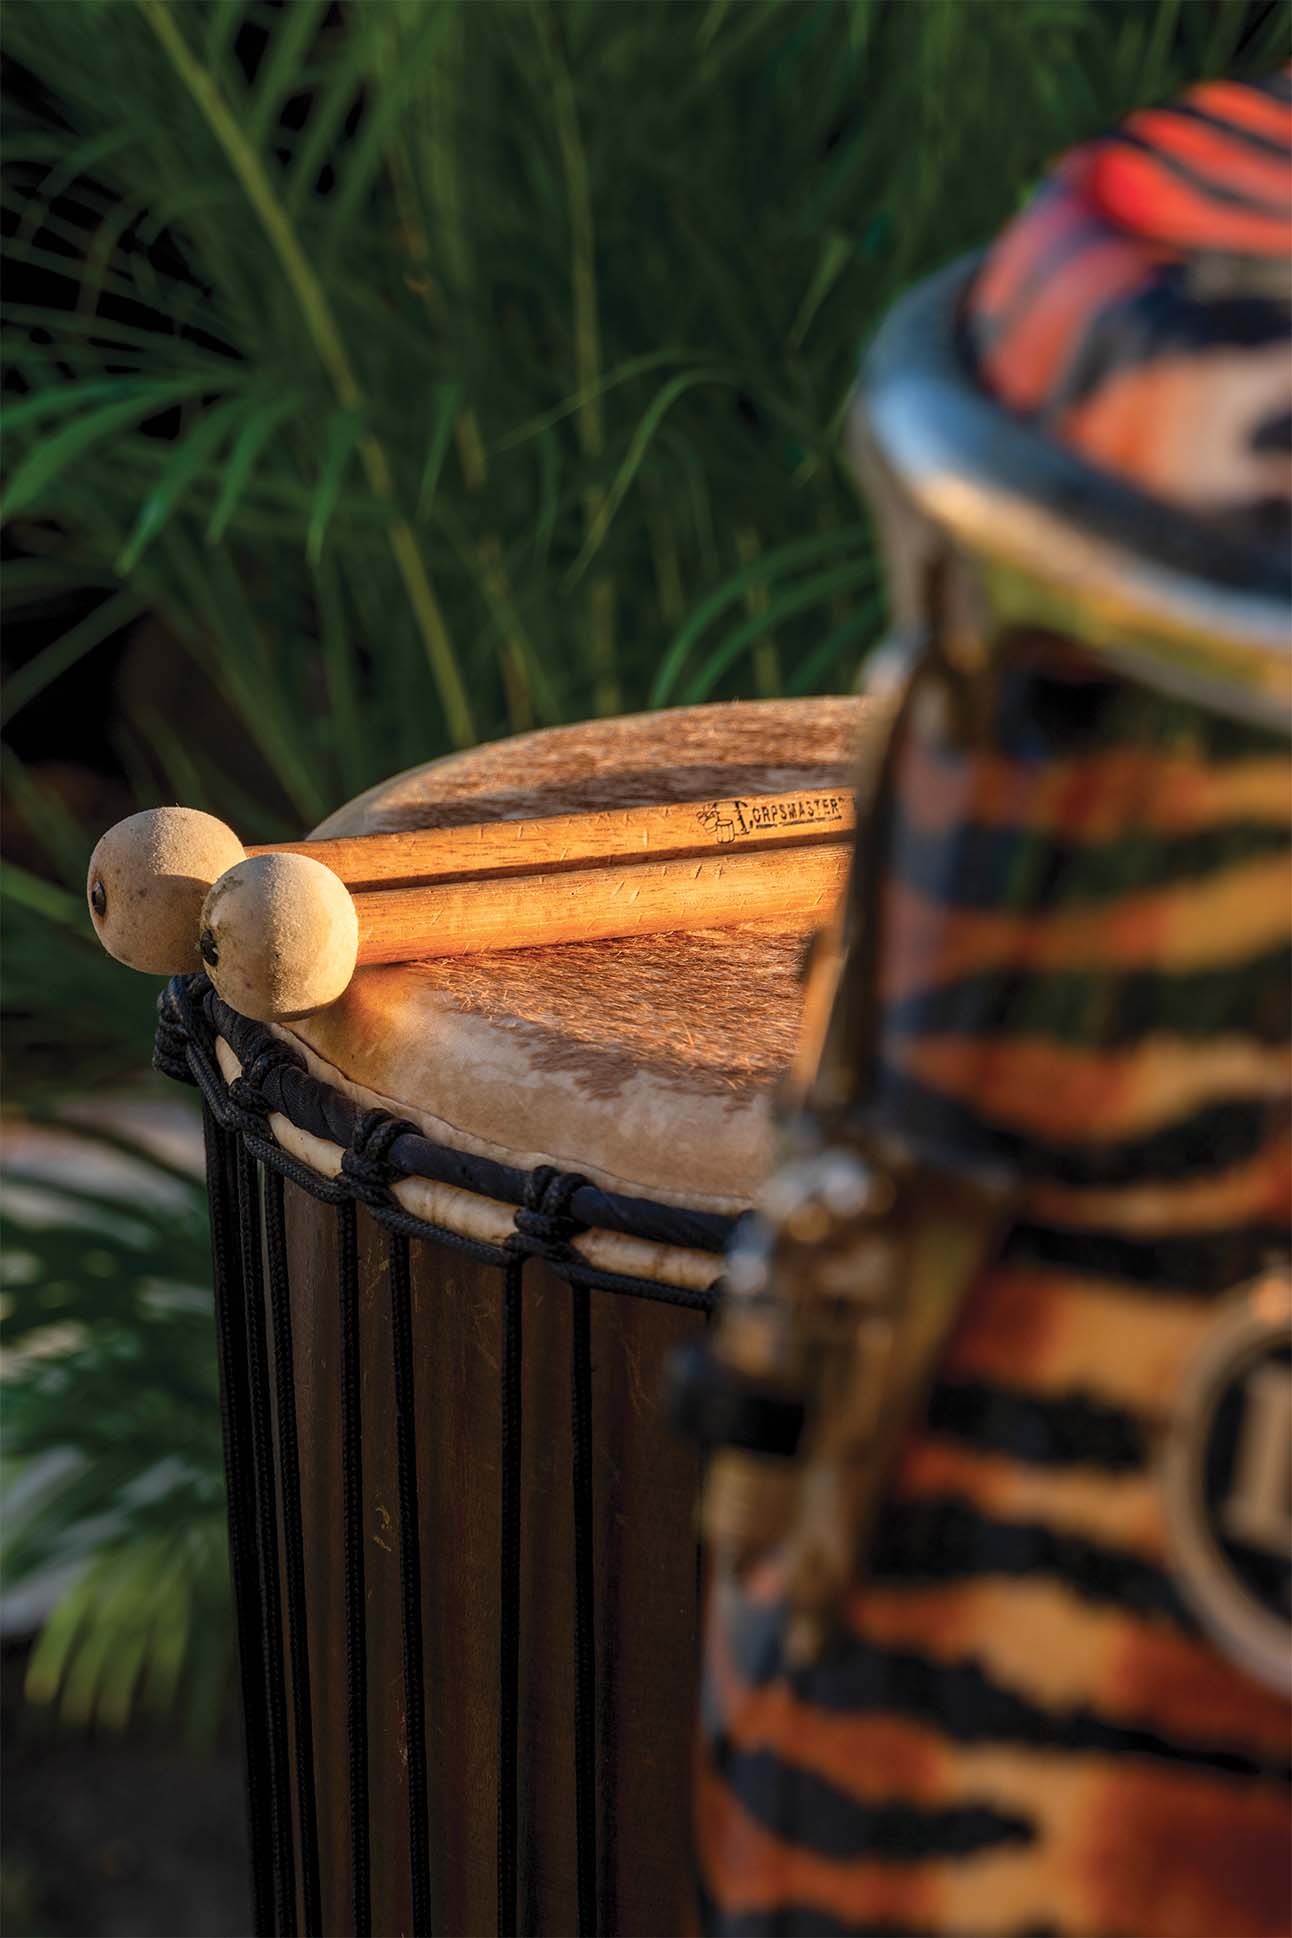 Close-up of a djembe drum with a wooden body and goat skin head, with a blurry djembe drum with a colorful pattern in the background, and green grass in the distance.